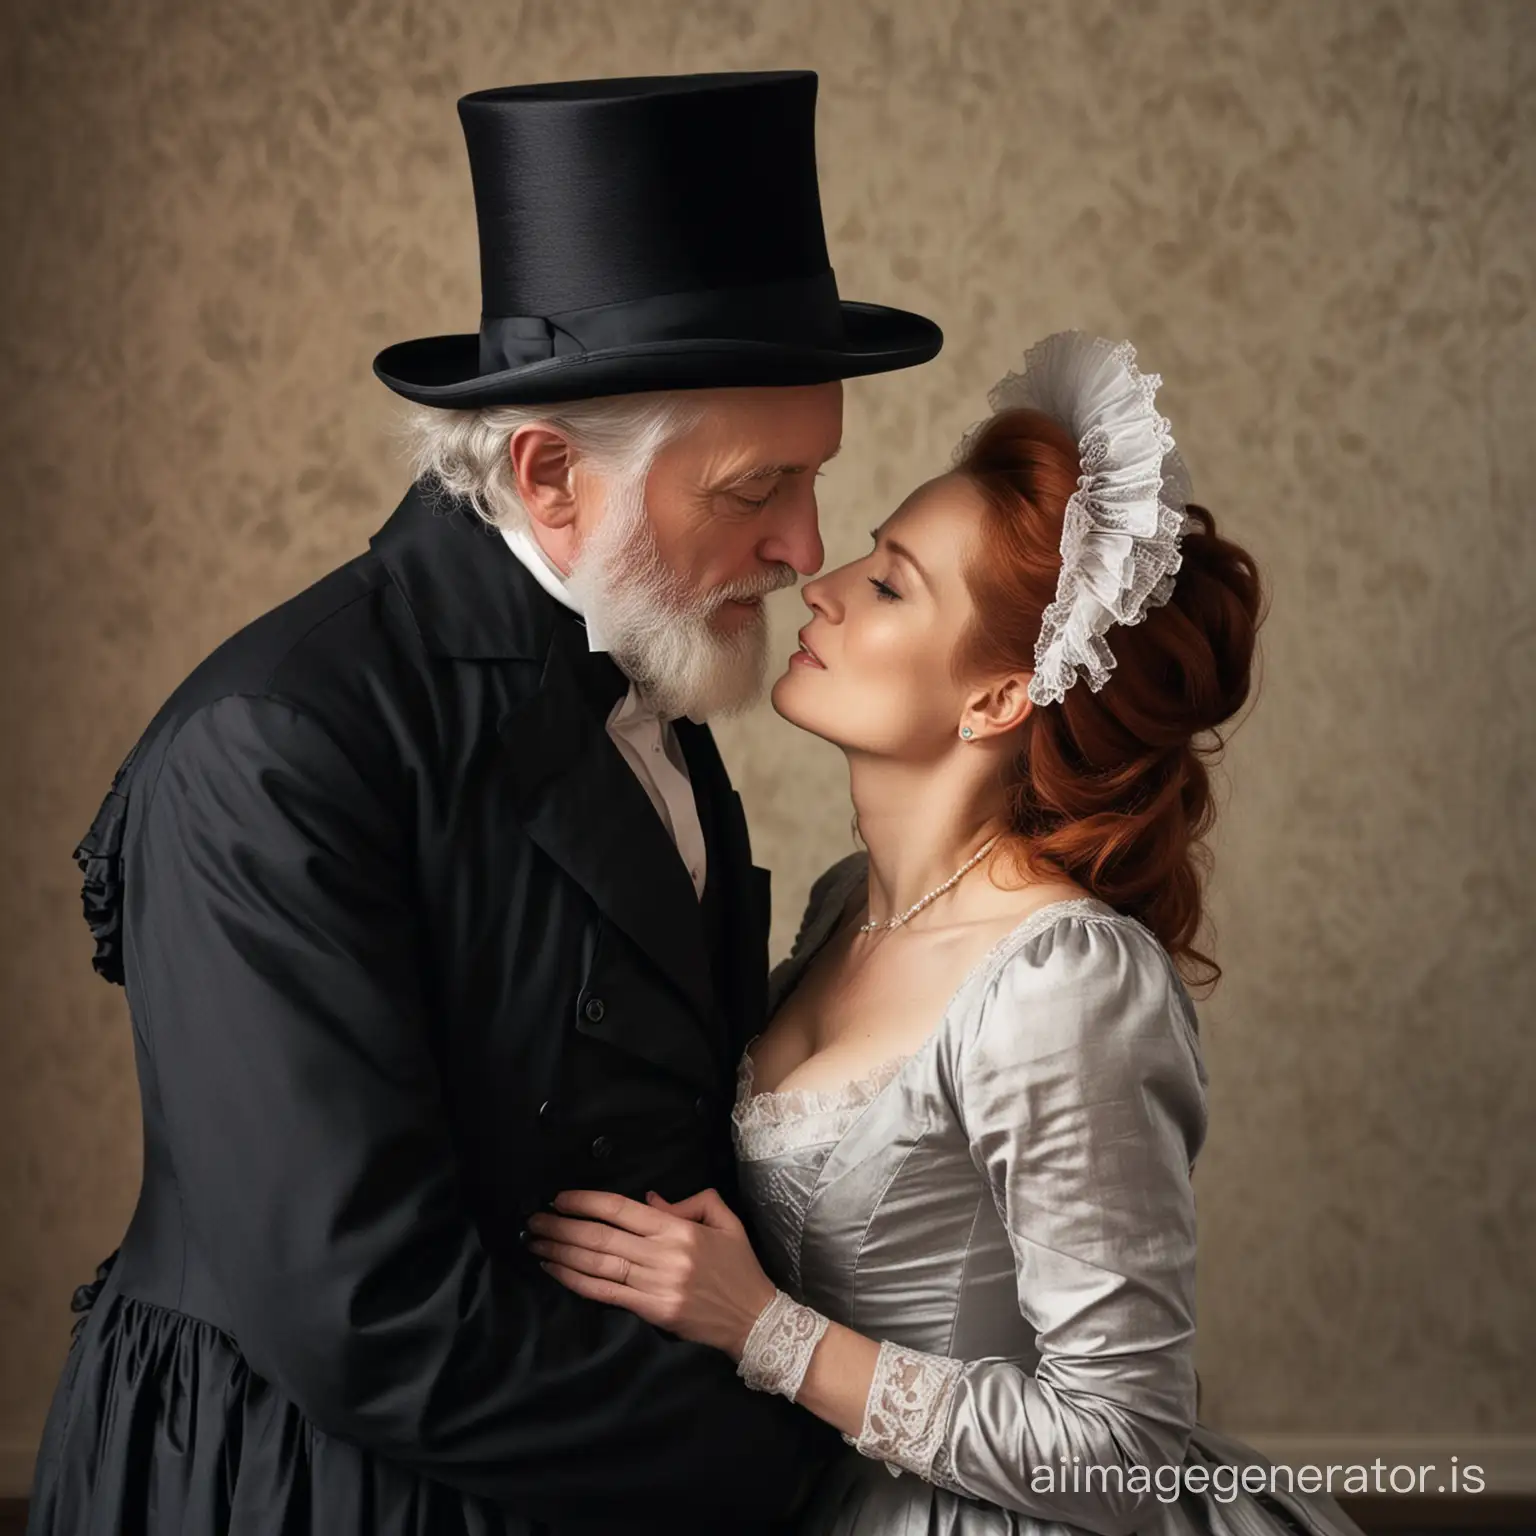 Romantic-Victorian-Newlyweds-RedHaired-Gillian-Anderson-and-Her-Elderly-Groom-Share-a-Tender-Kiss